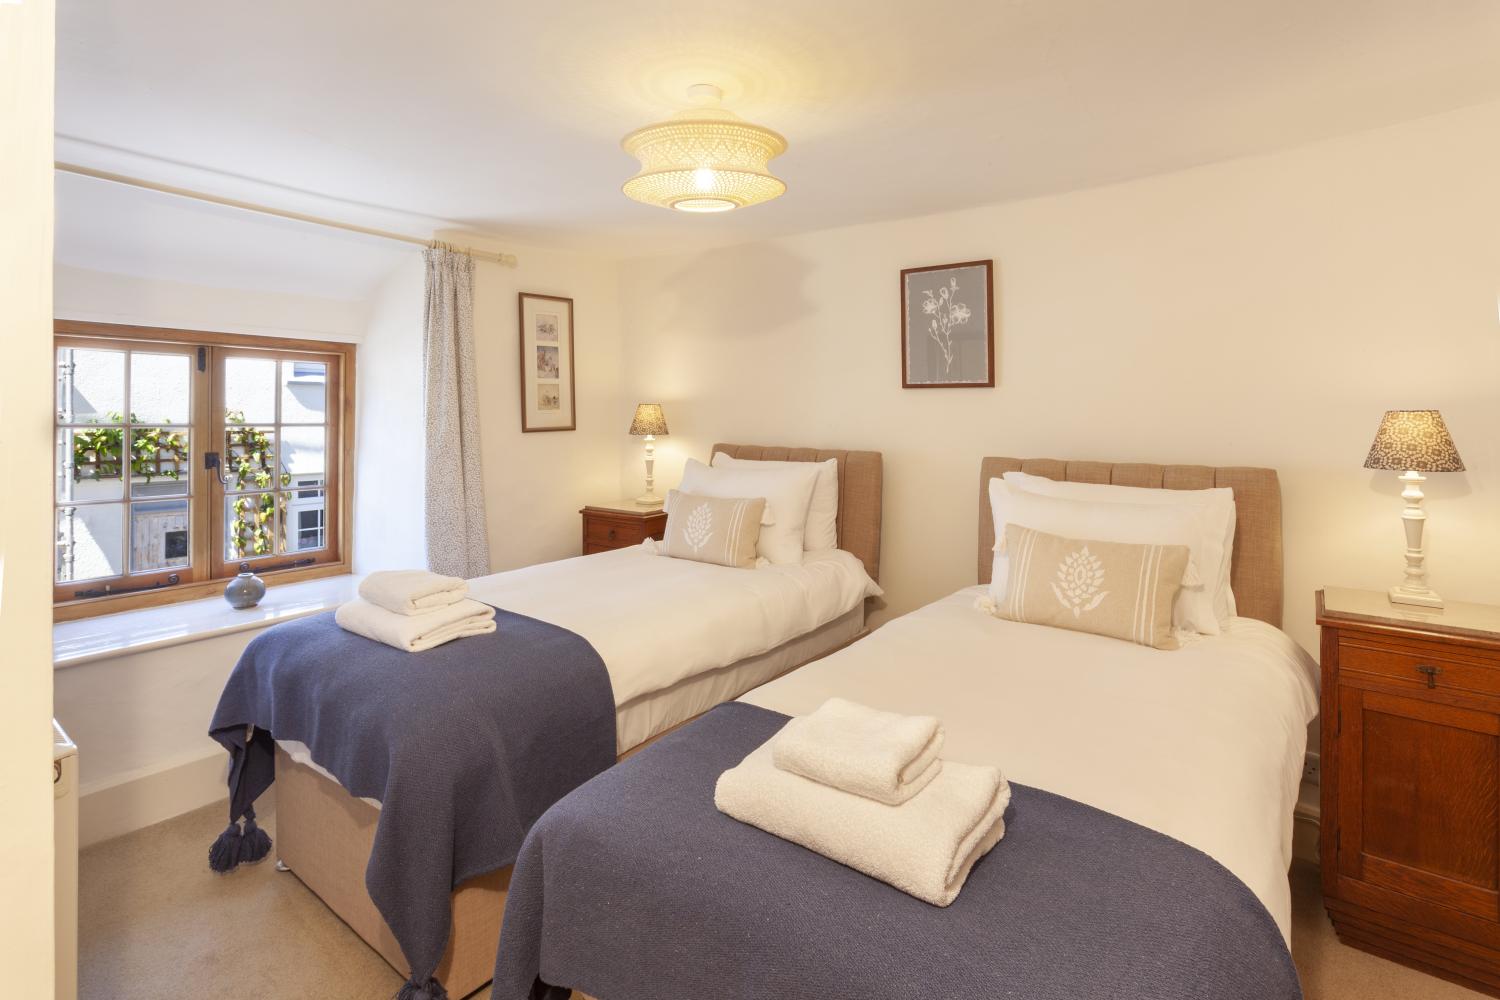 Single beds or super king on your request, bedroom at the front of the cottage